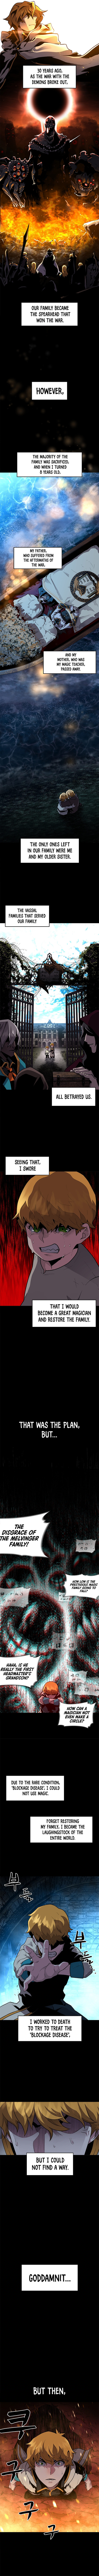 Talent-Swallowing Magician - Chapter 0 Page 3